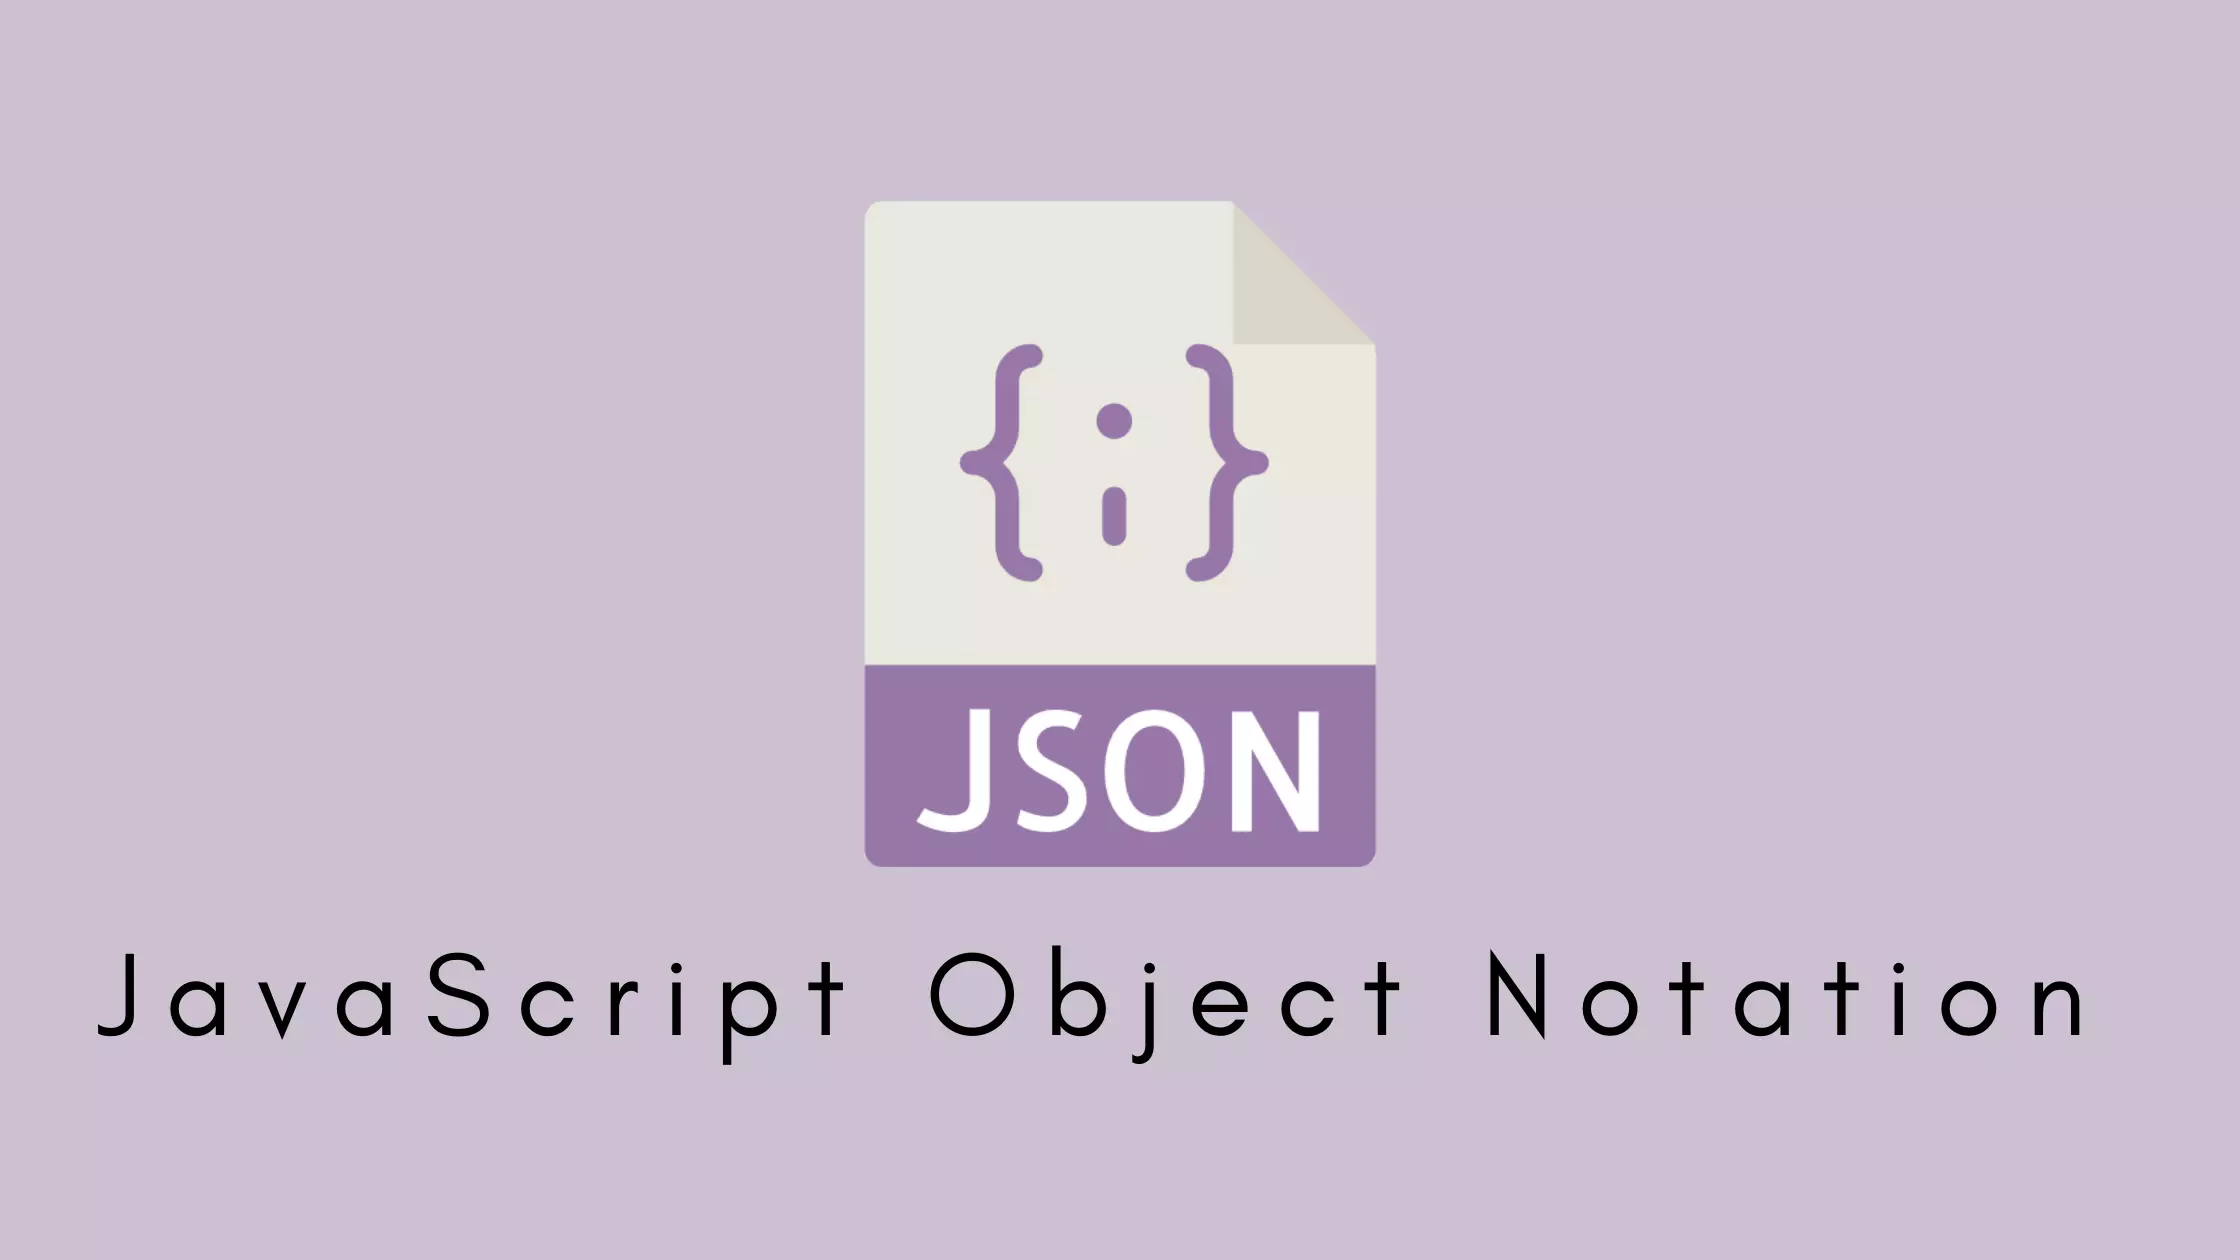 JSON Full Form is JavaScript Object Notation